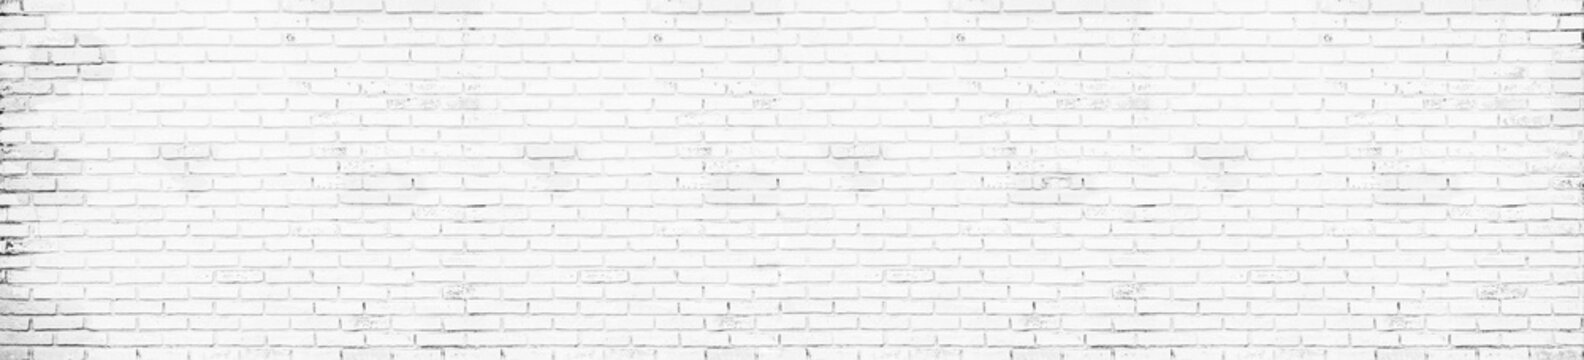 Fototapeta Panorama of white brick wall textured backgrounds for design.